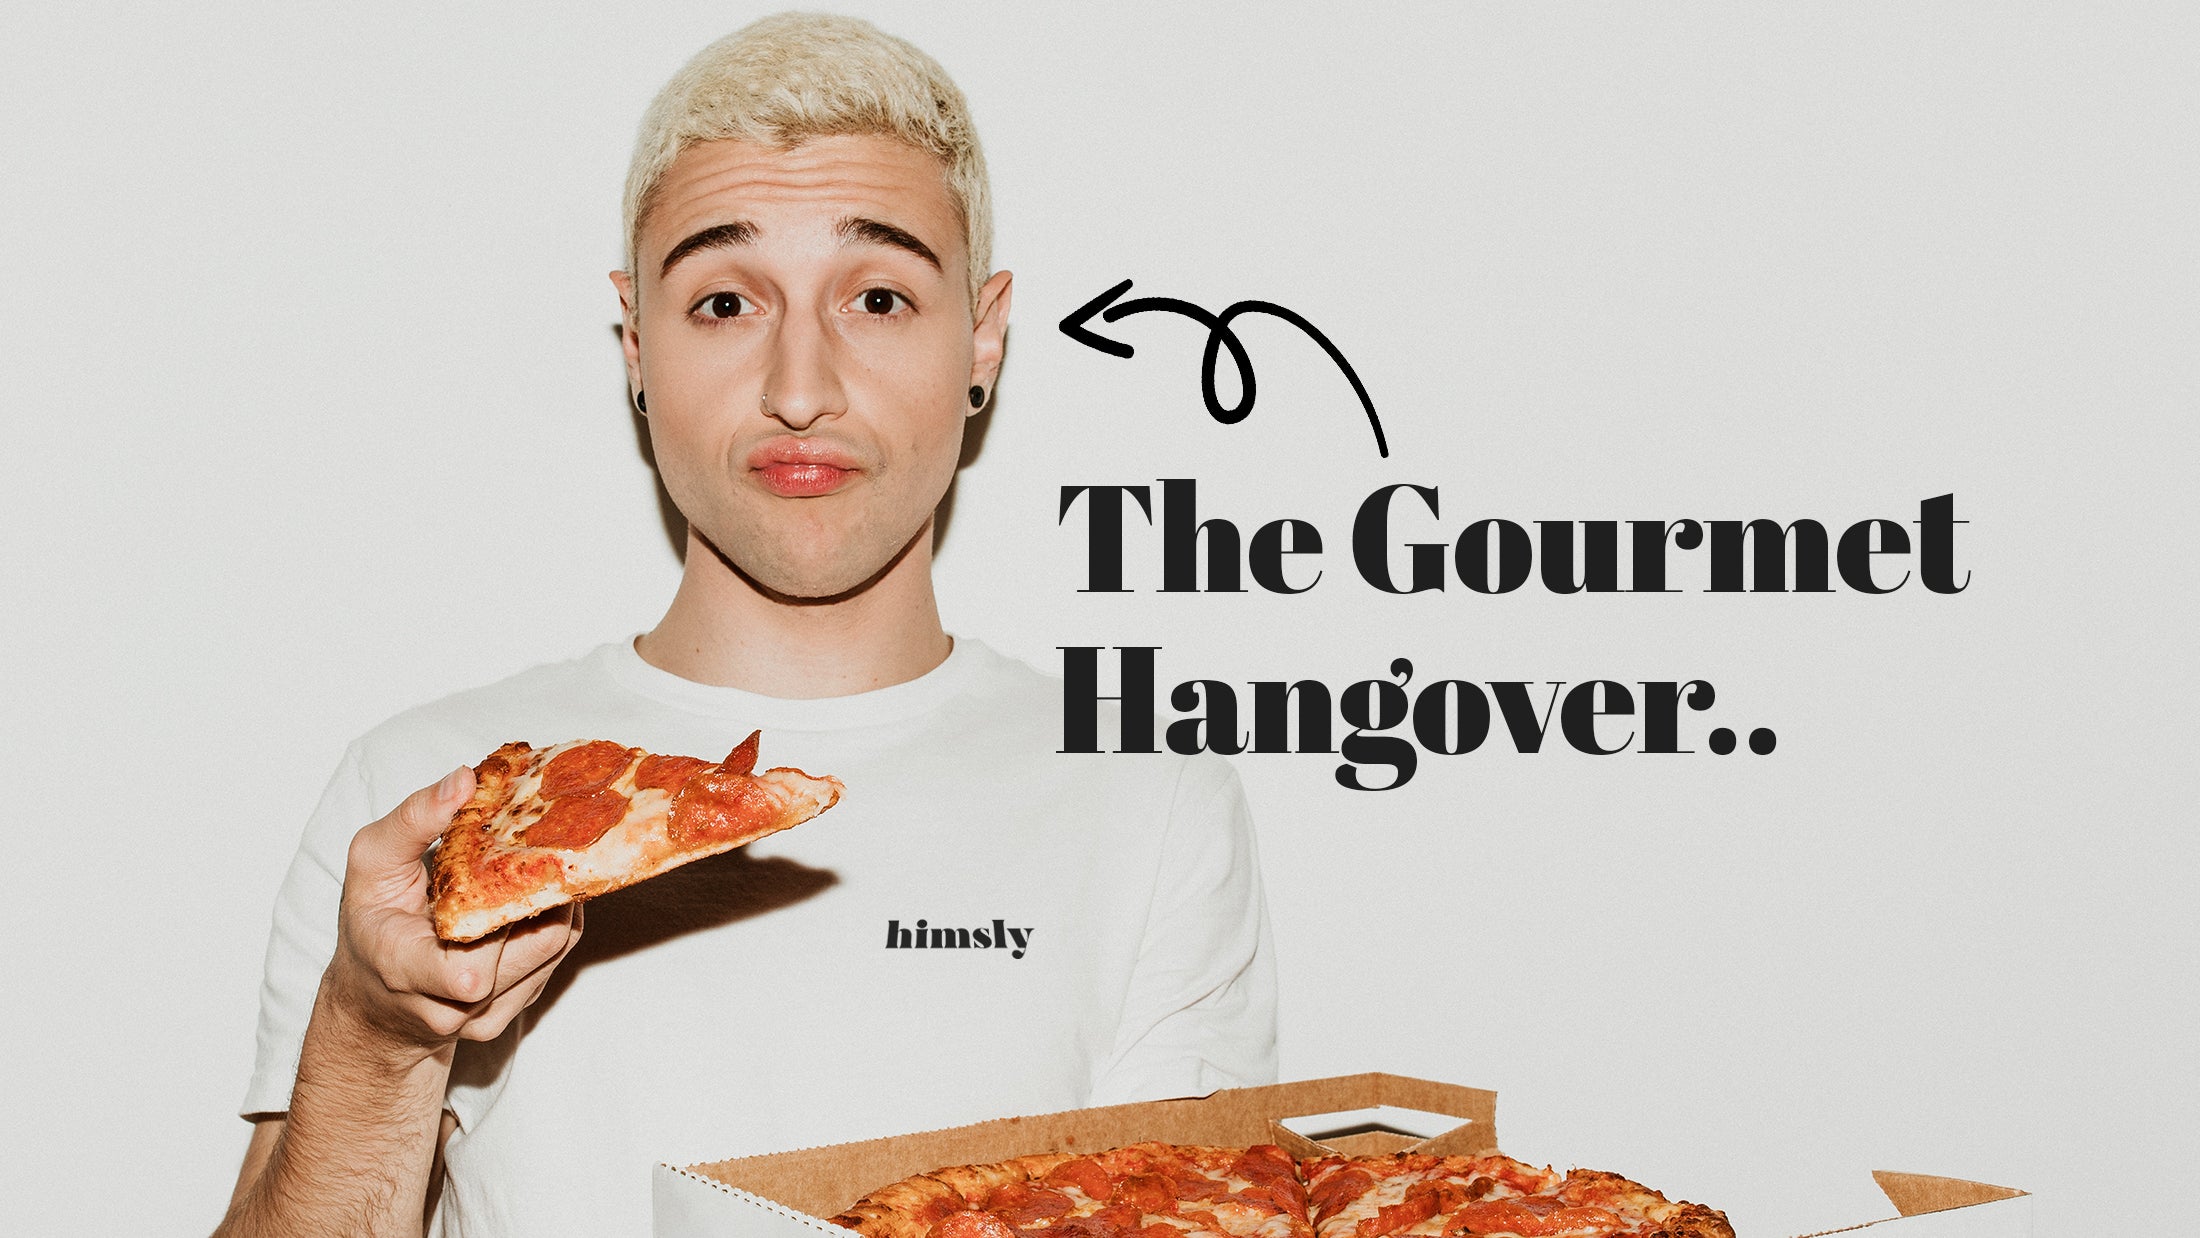 The Hilarious Lineup of Hangovers: Which One is Yours? – himsly